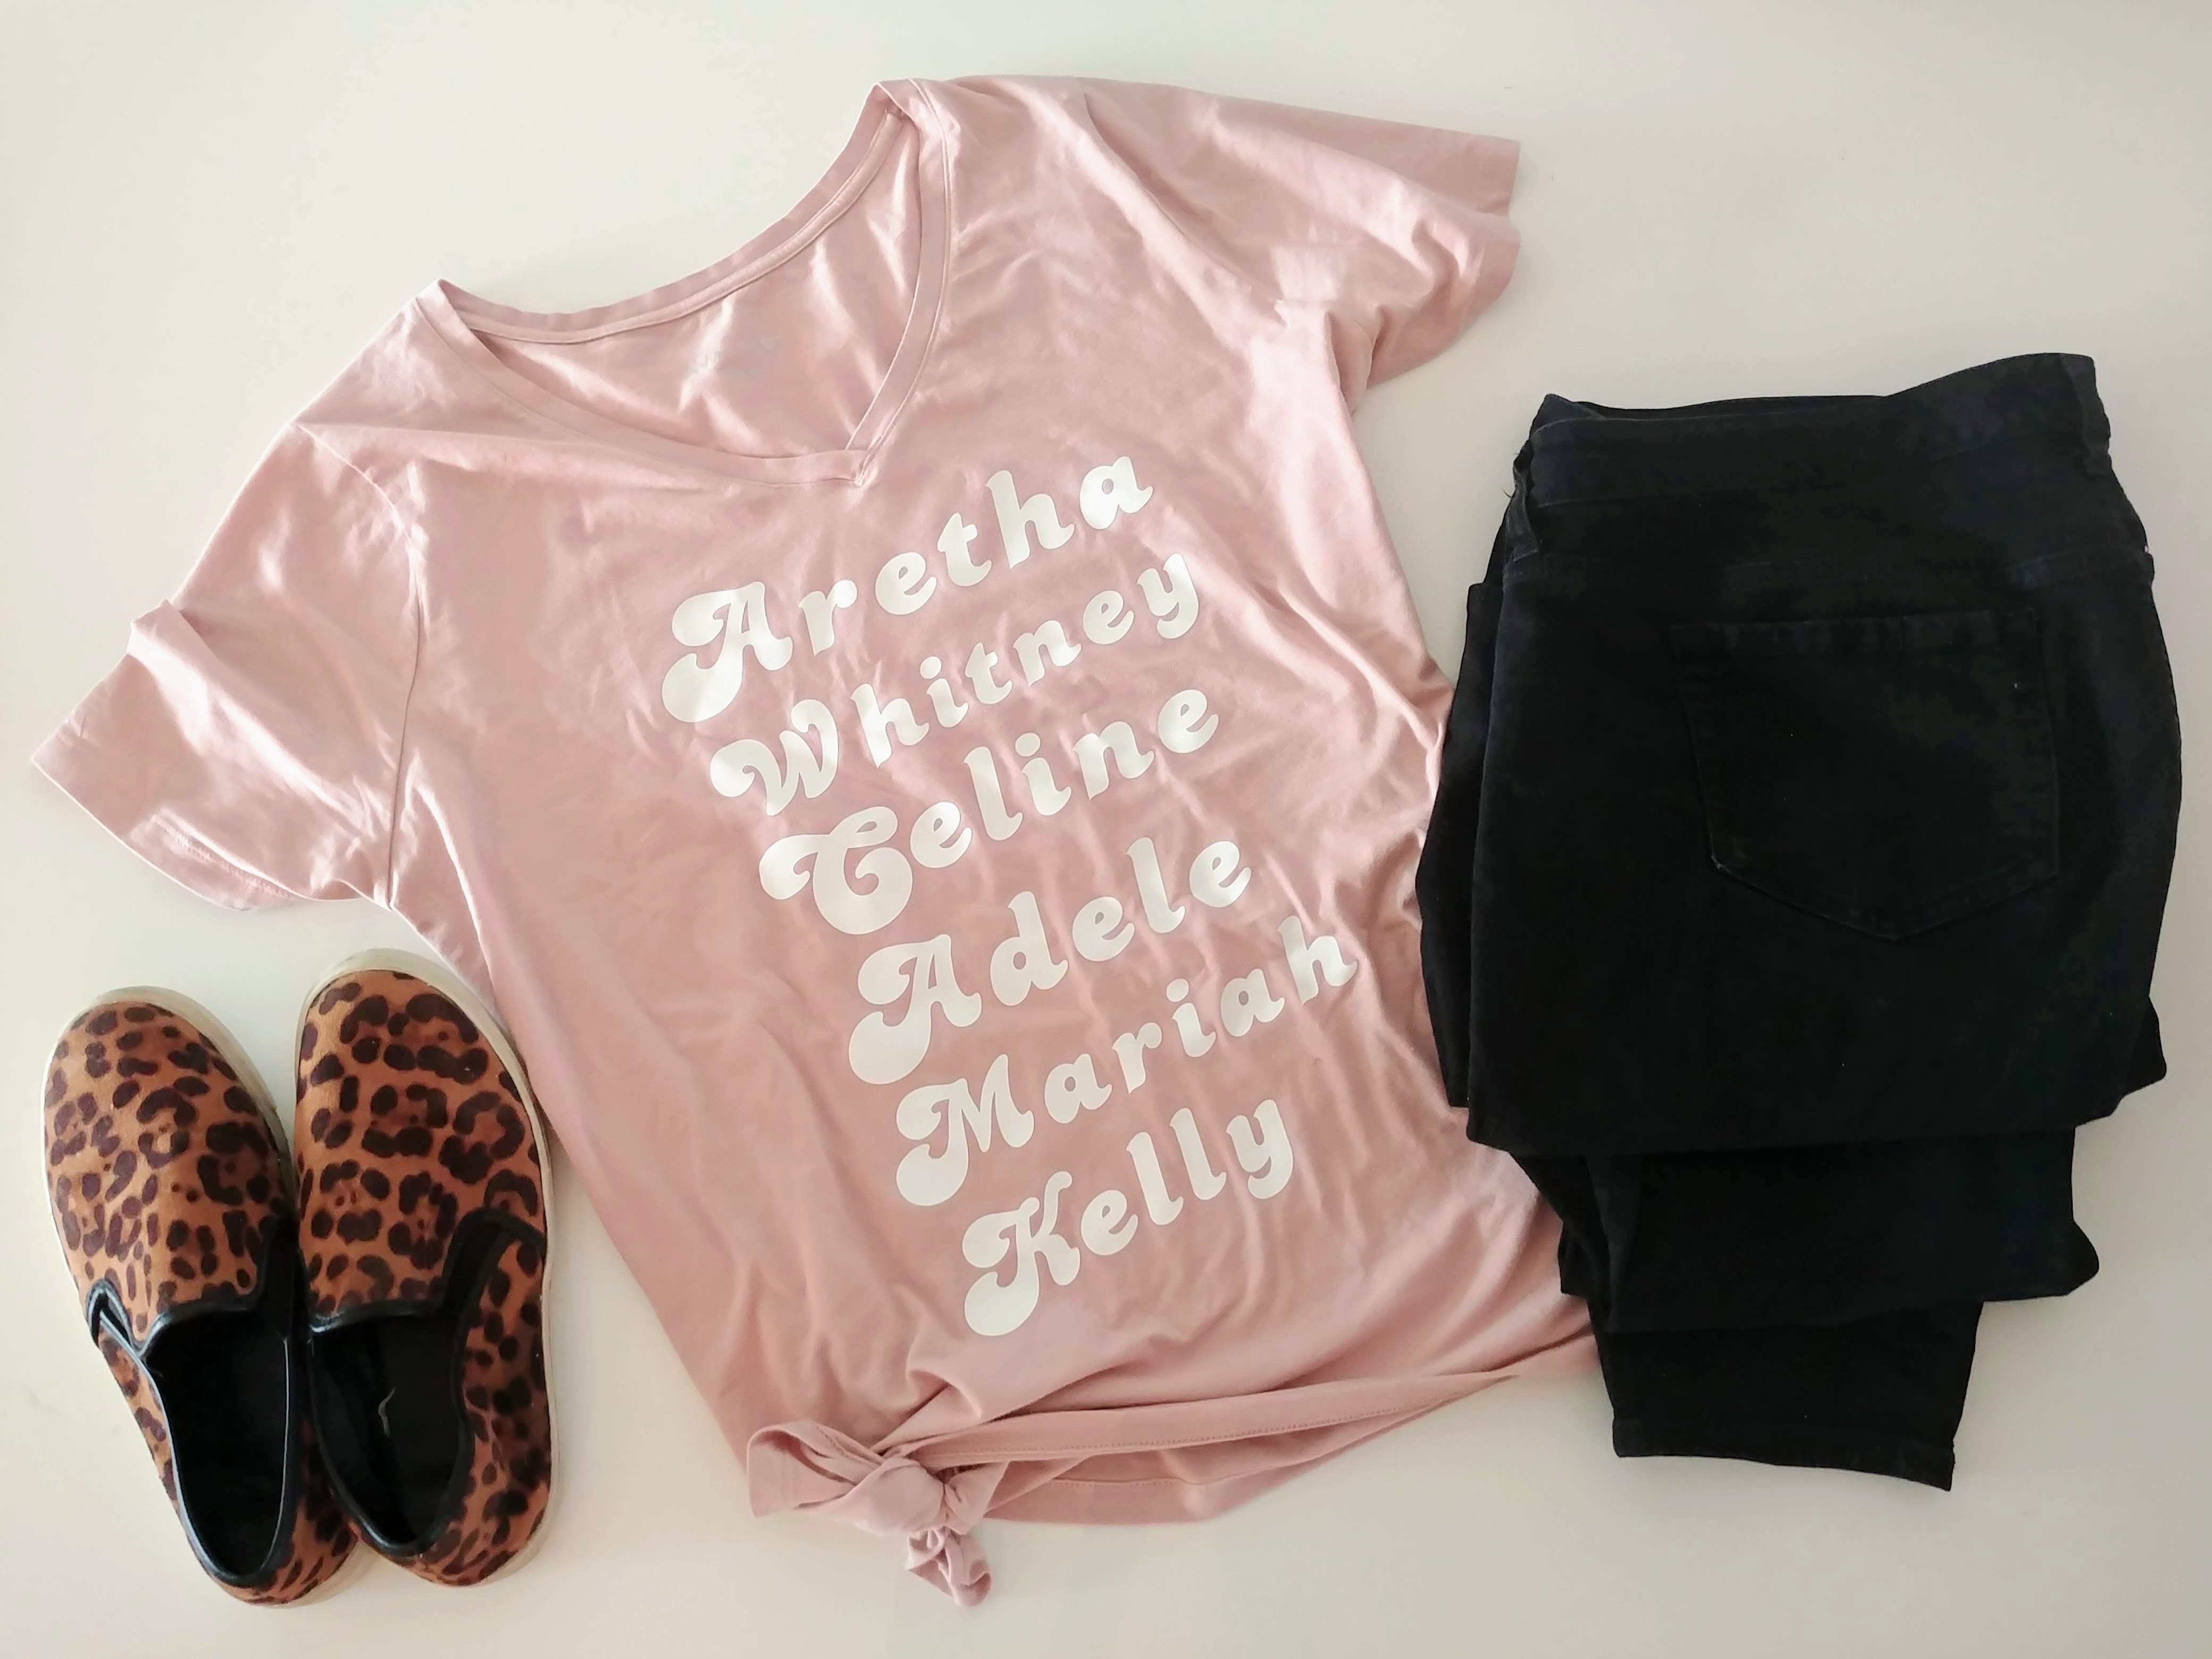 Creating Your Own T-shirt Design Using the Cricut